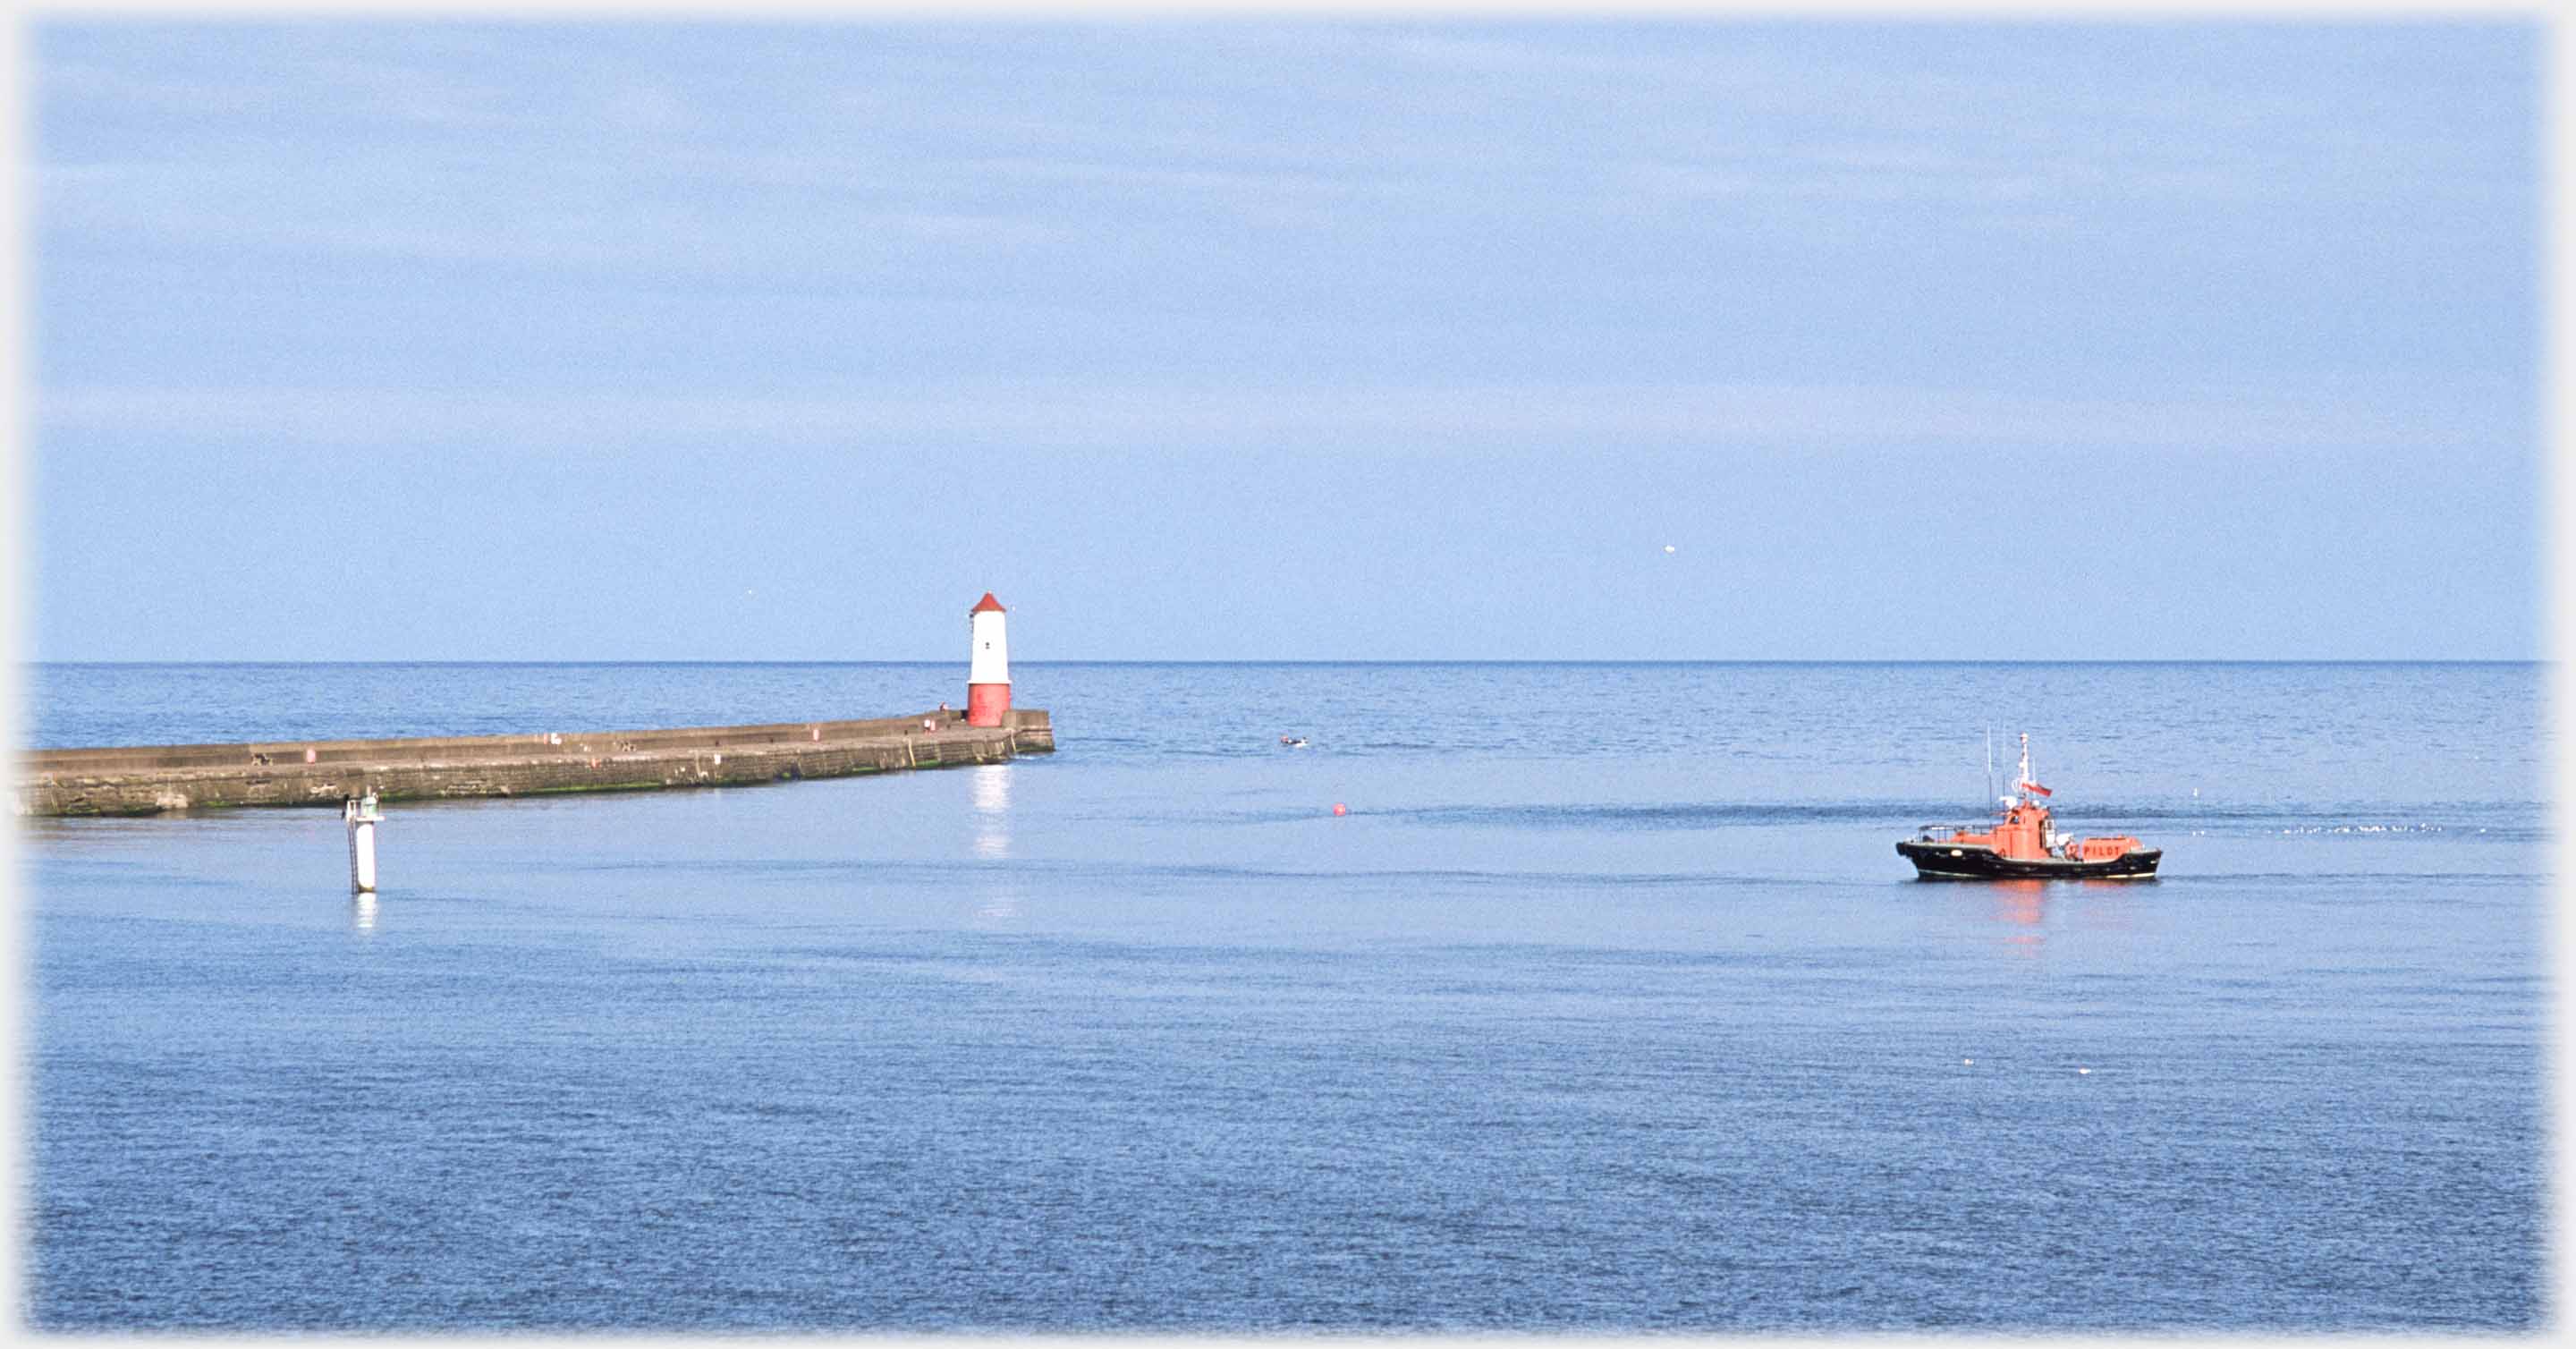 Pier, lighthouse and lifeboat.